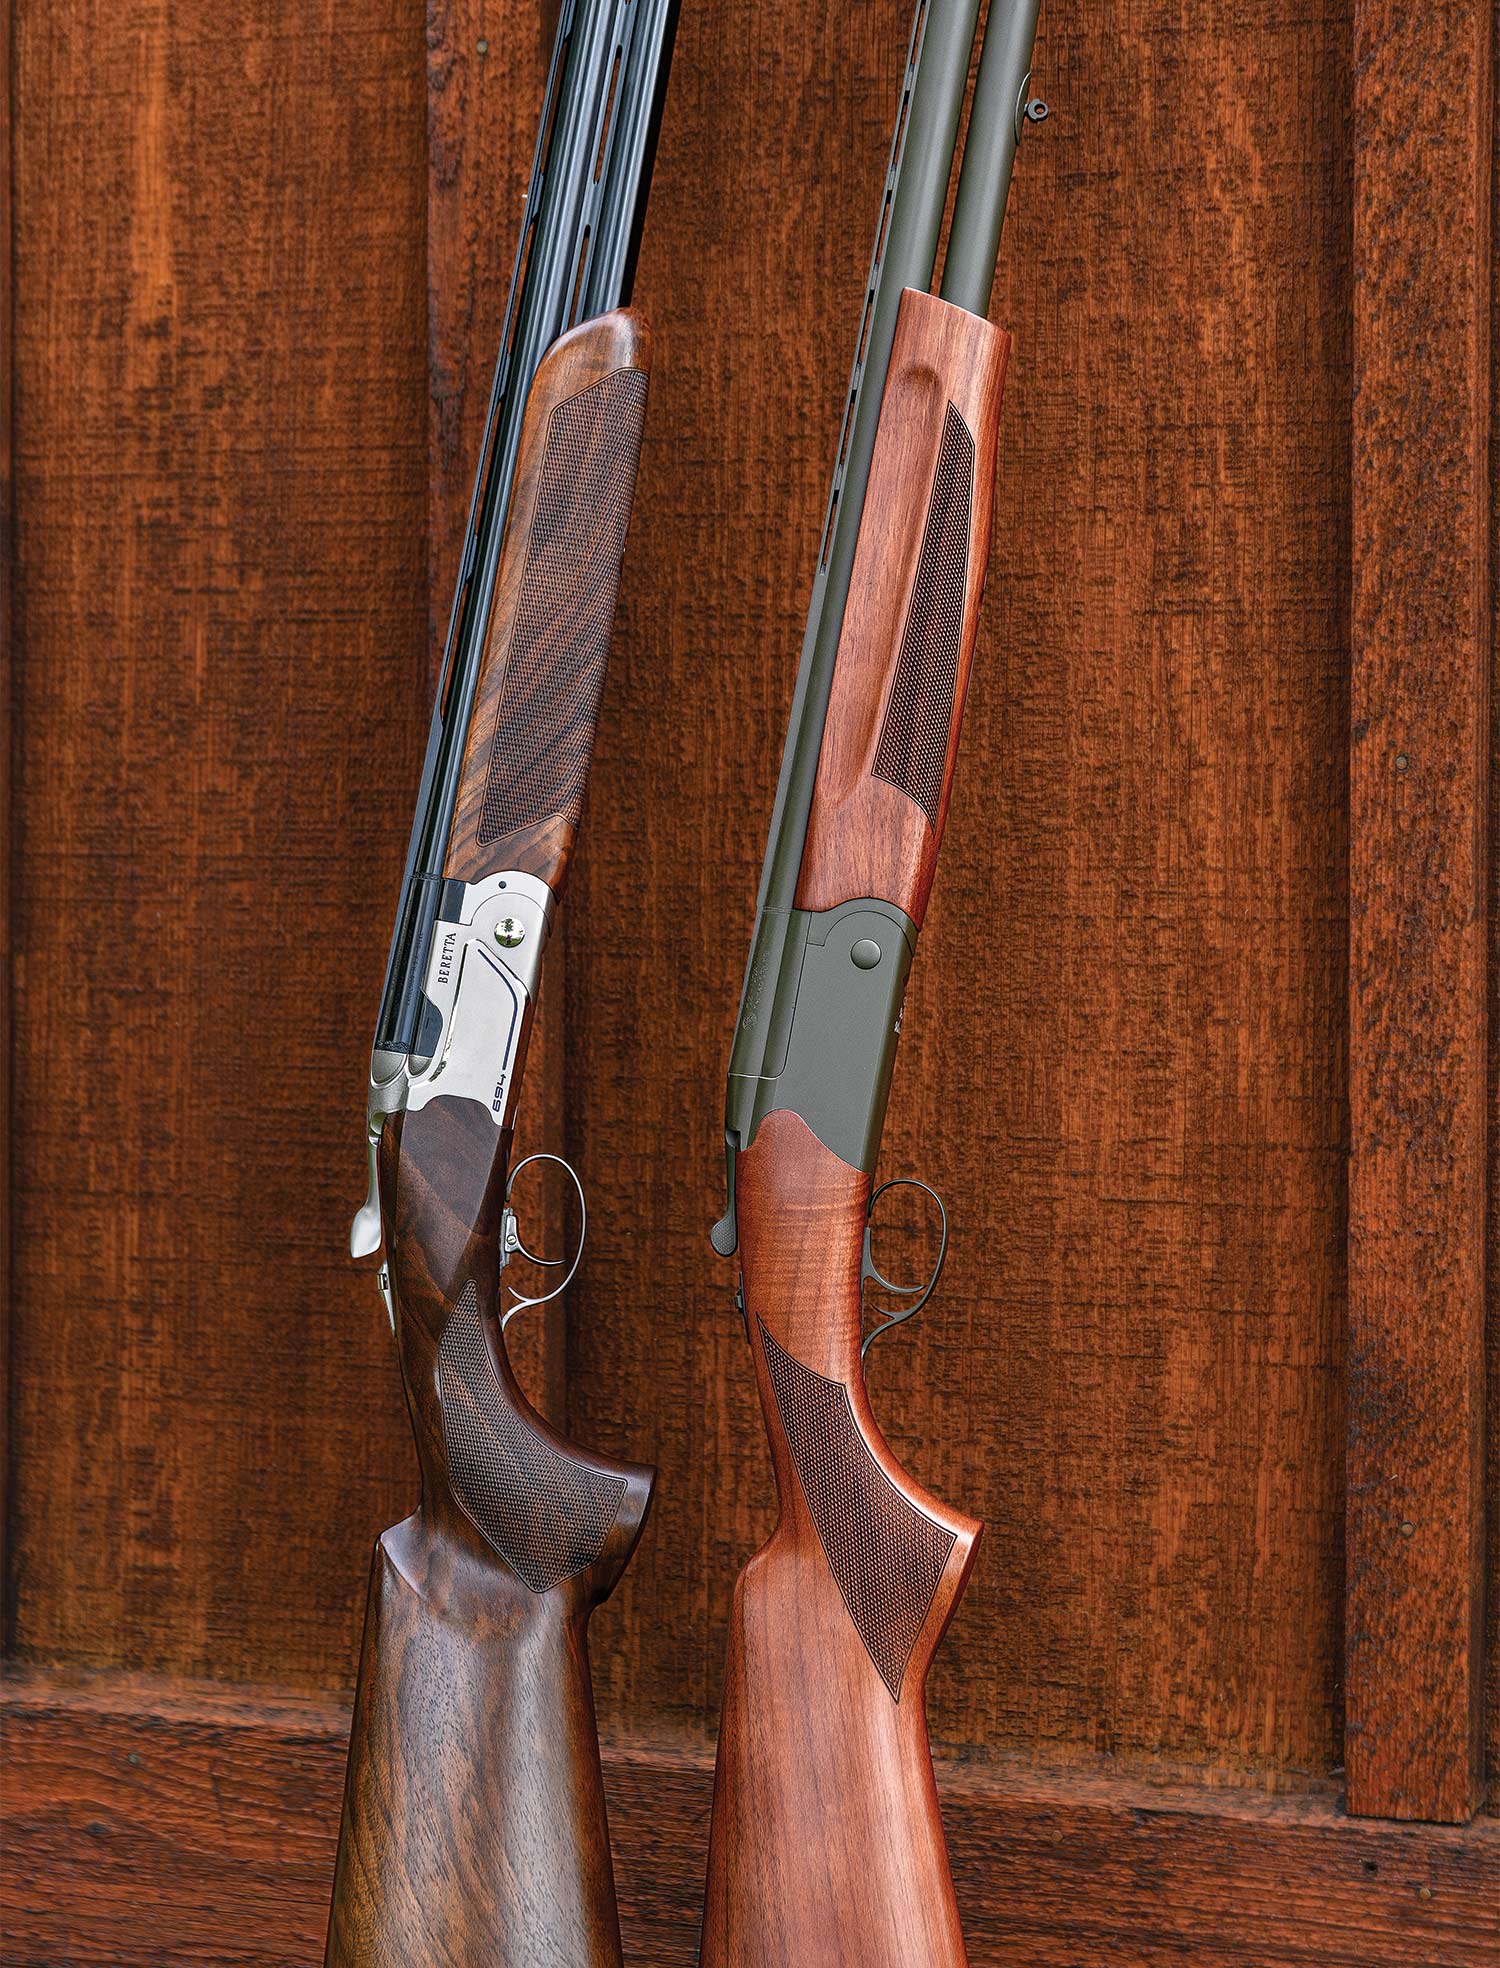 Two shotguns leaning against a wall.